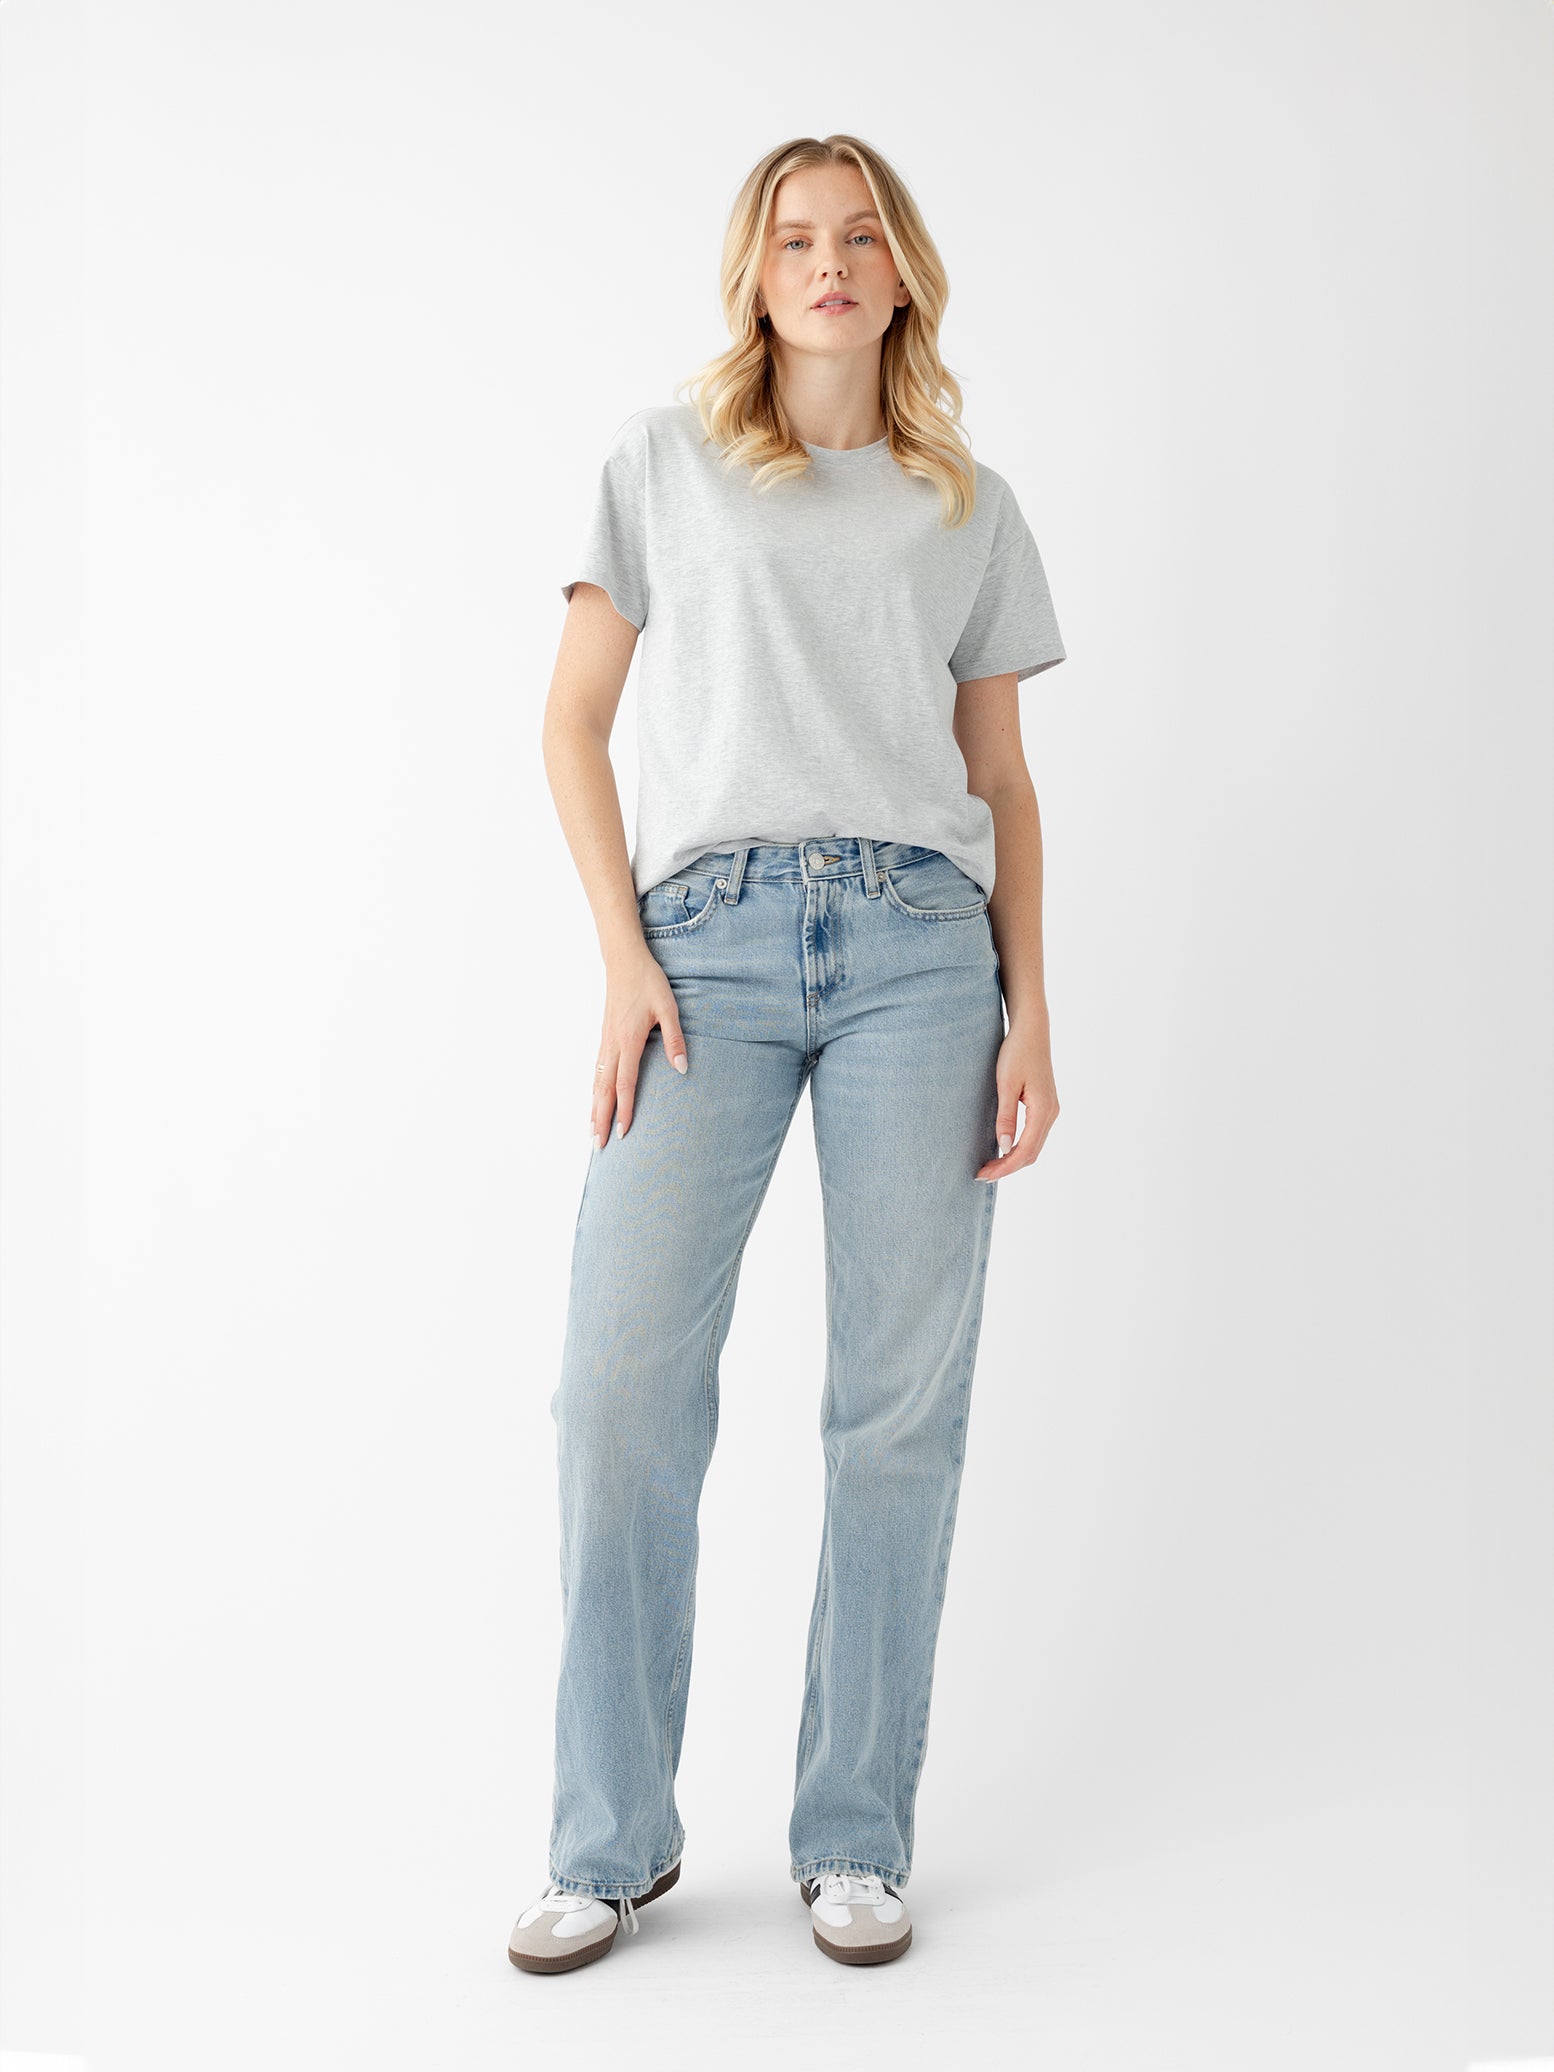 Woman wearing french dove heather tee with jeans |Color:French Dove Heather